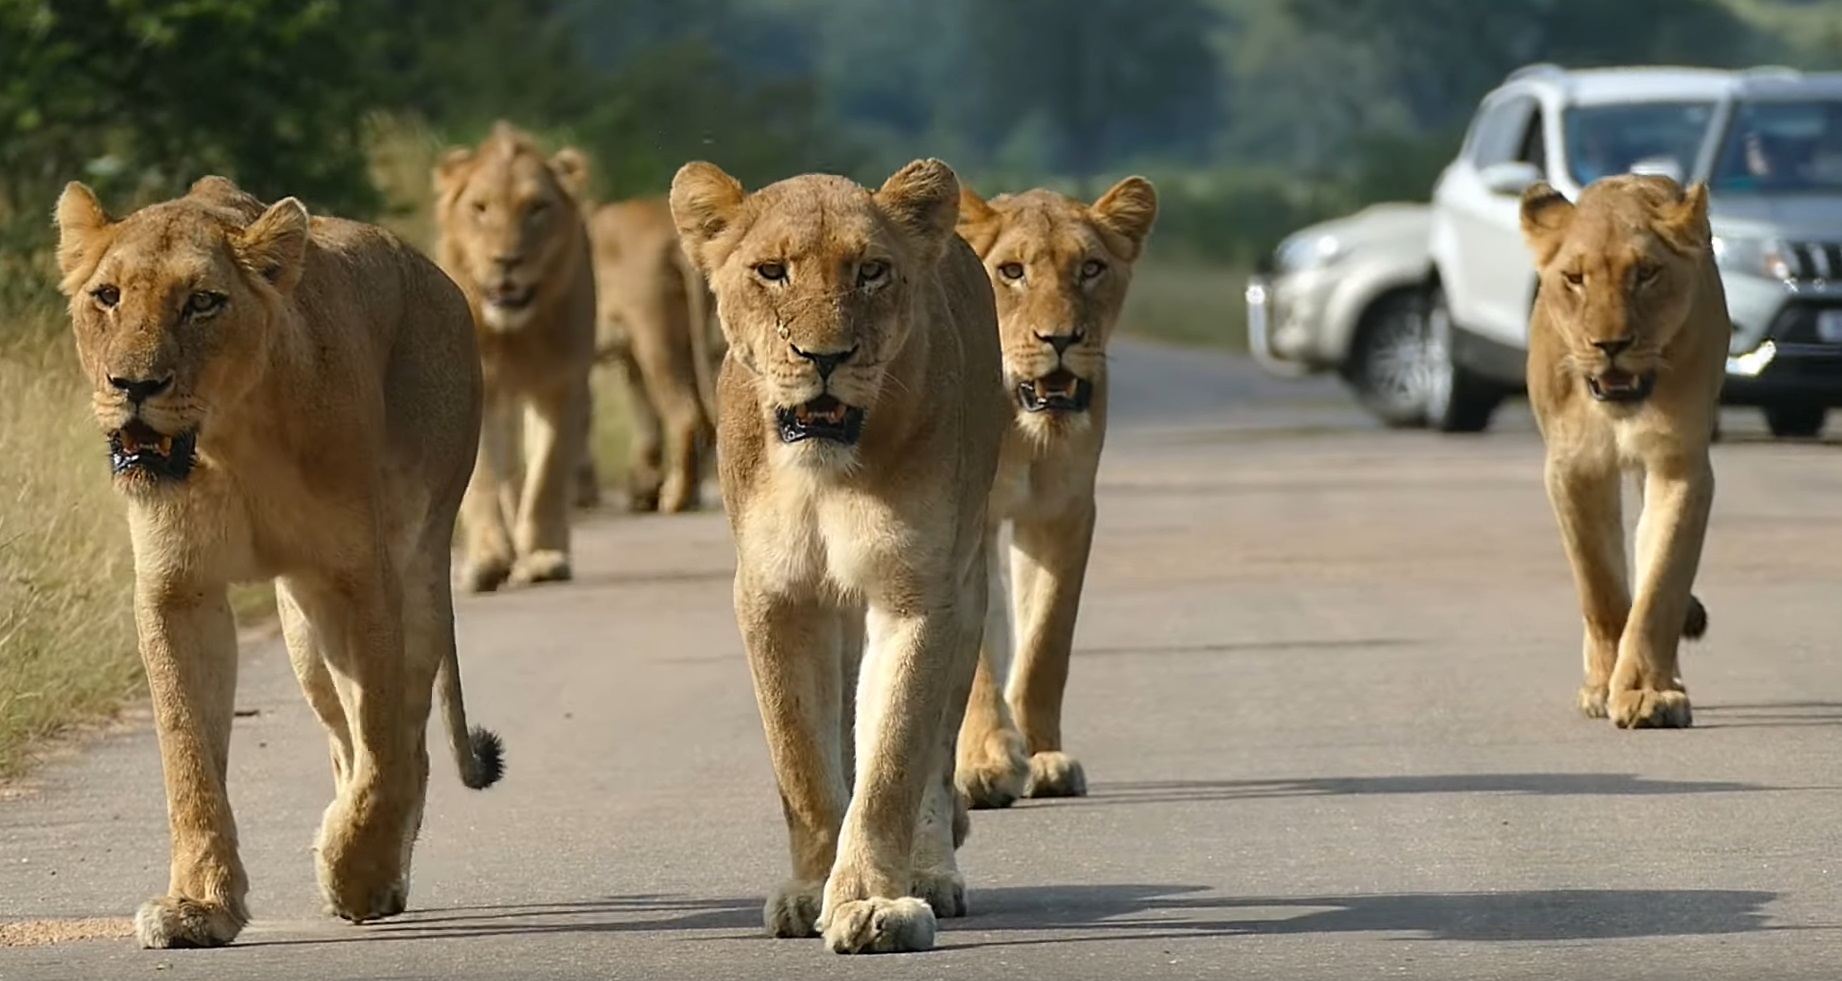 Pride Of Lions Own The Road